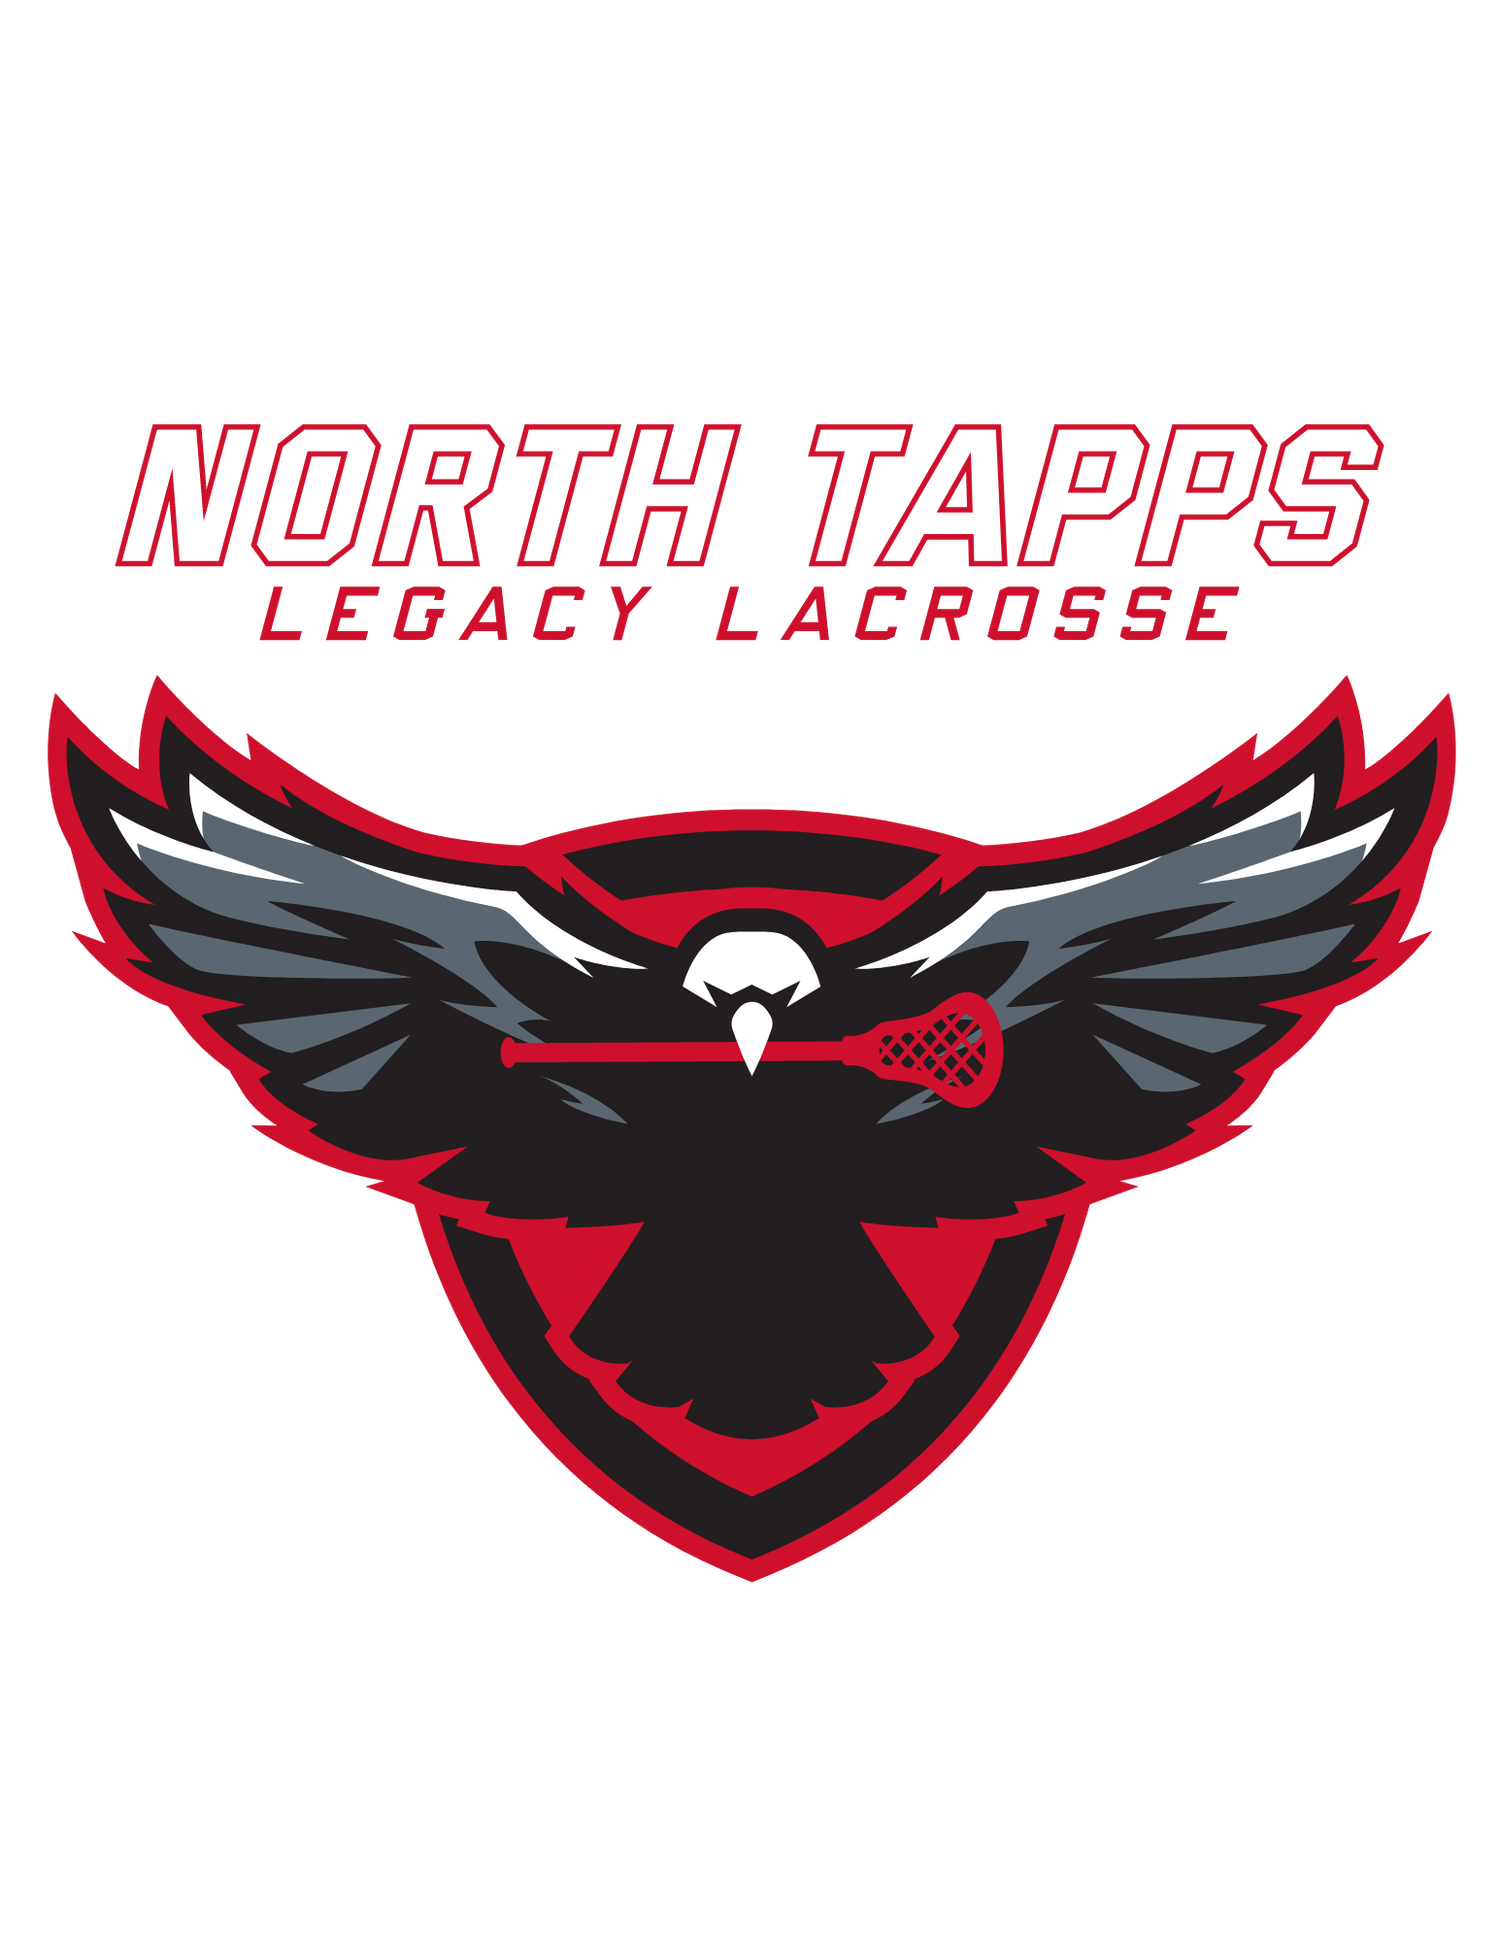 North Tapps Legacy Lacrosse